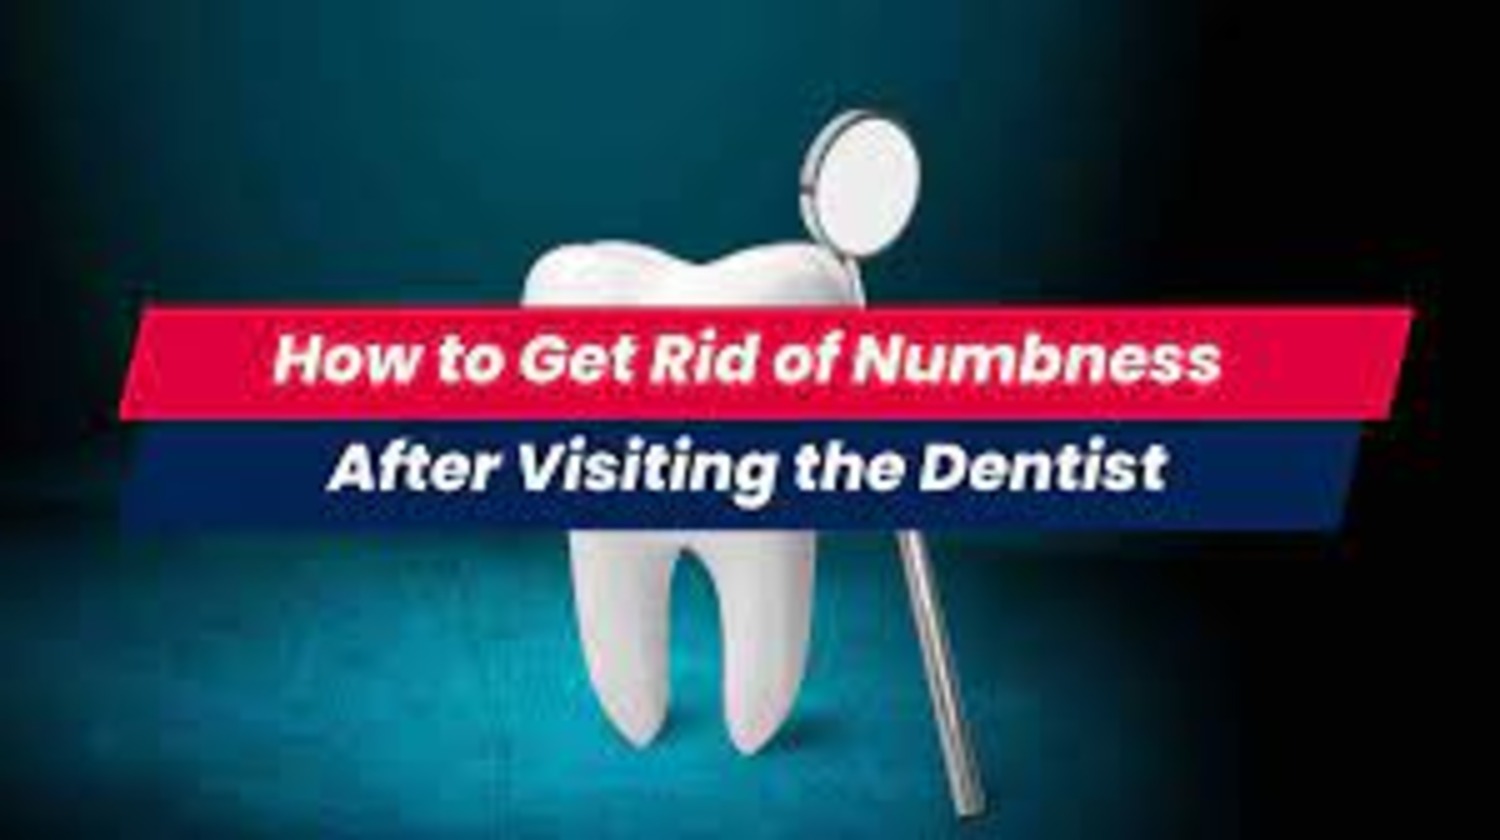 How to Get Rid of Numbness After the Dentist